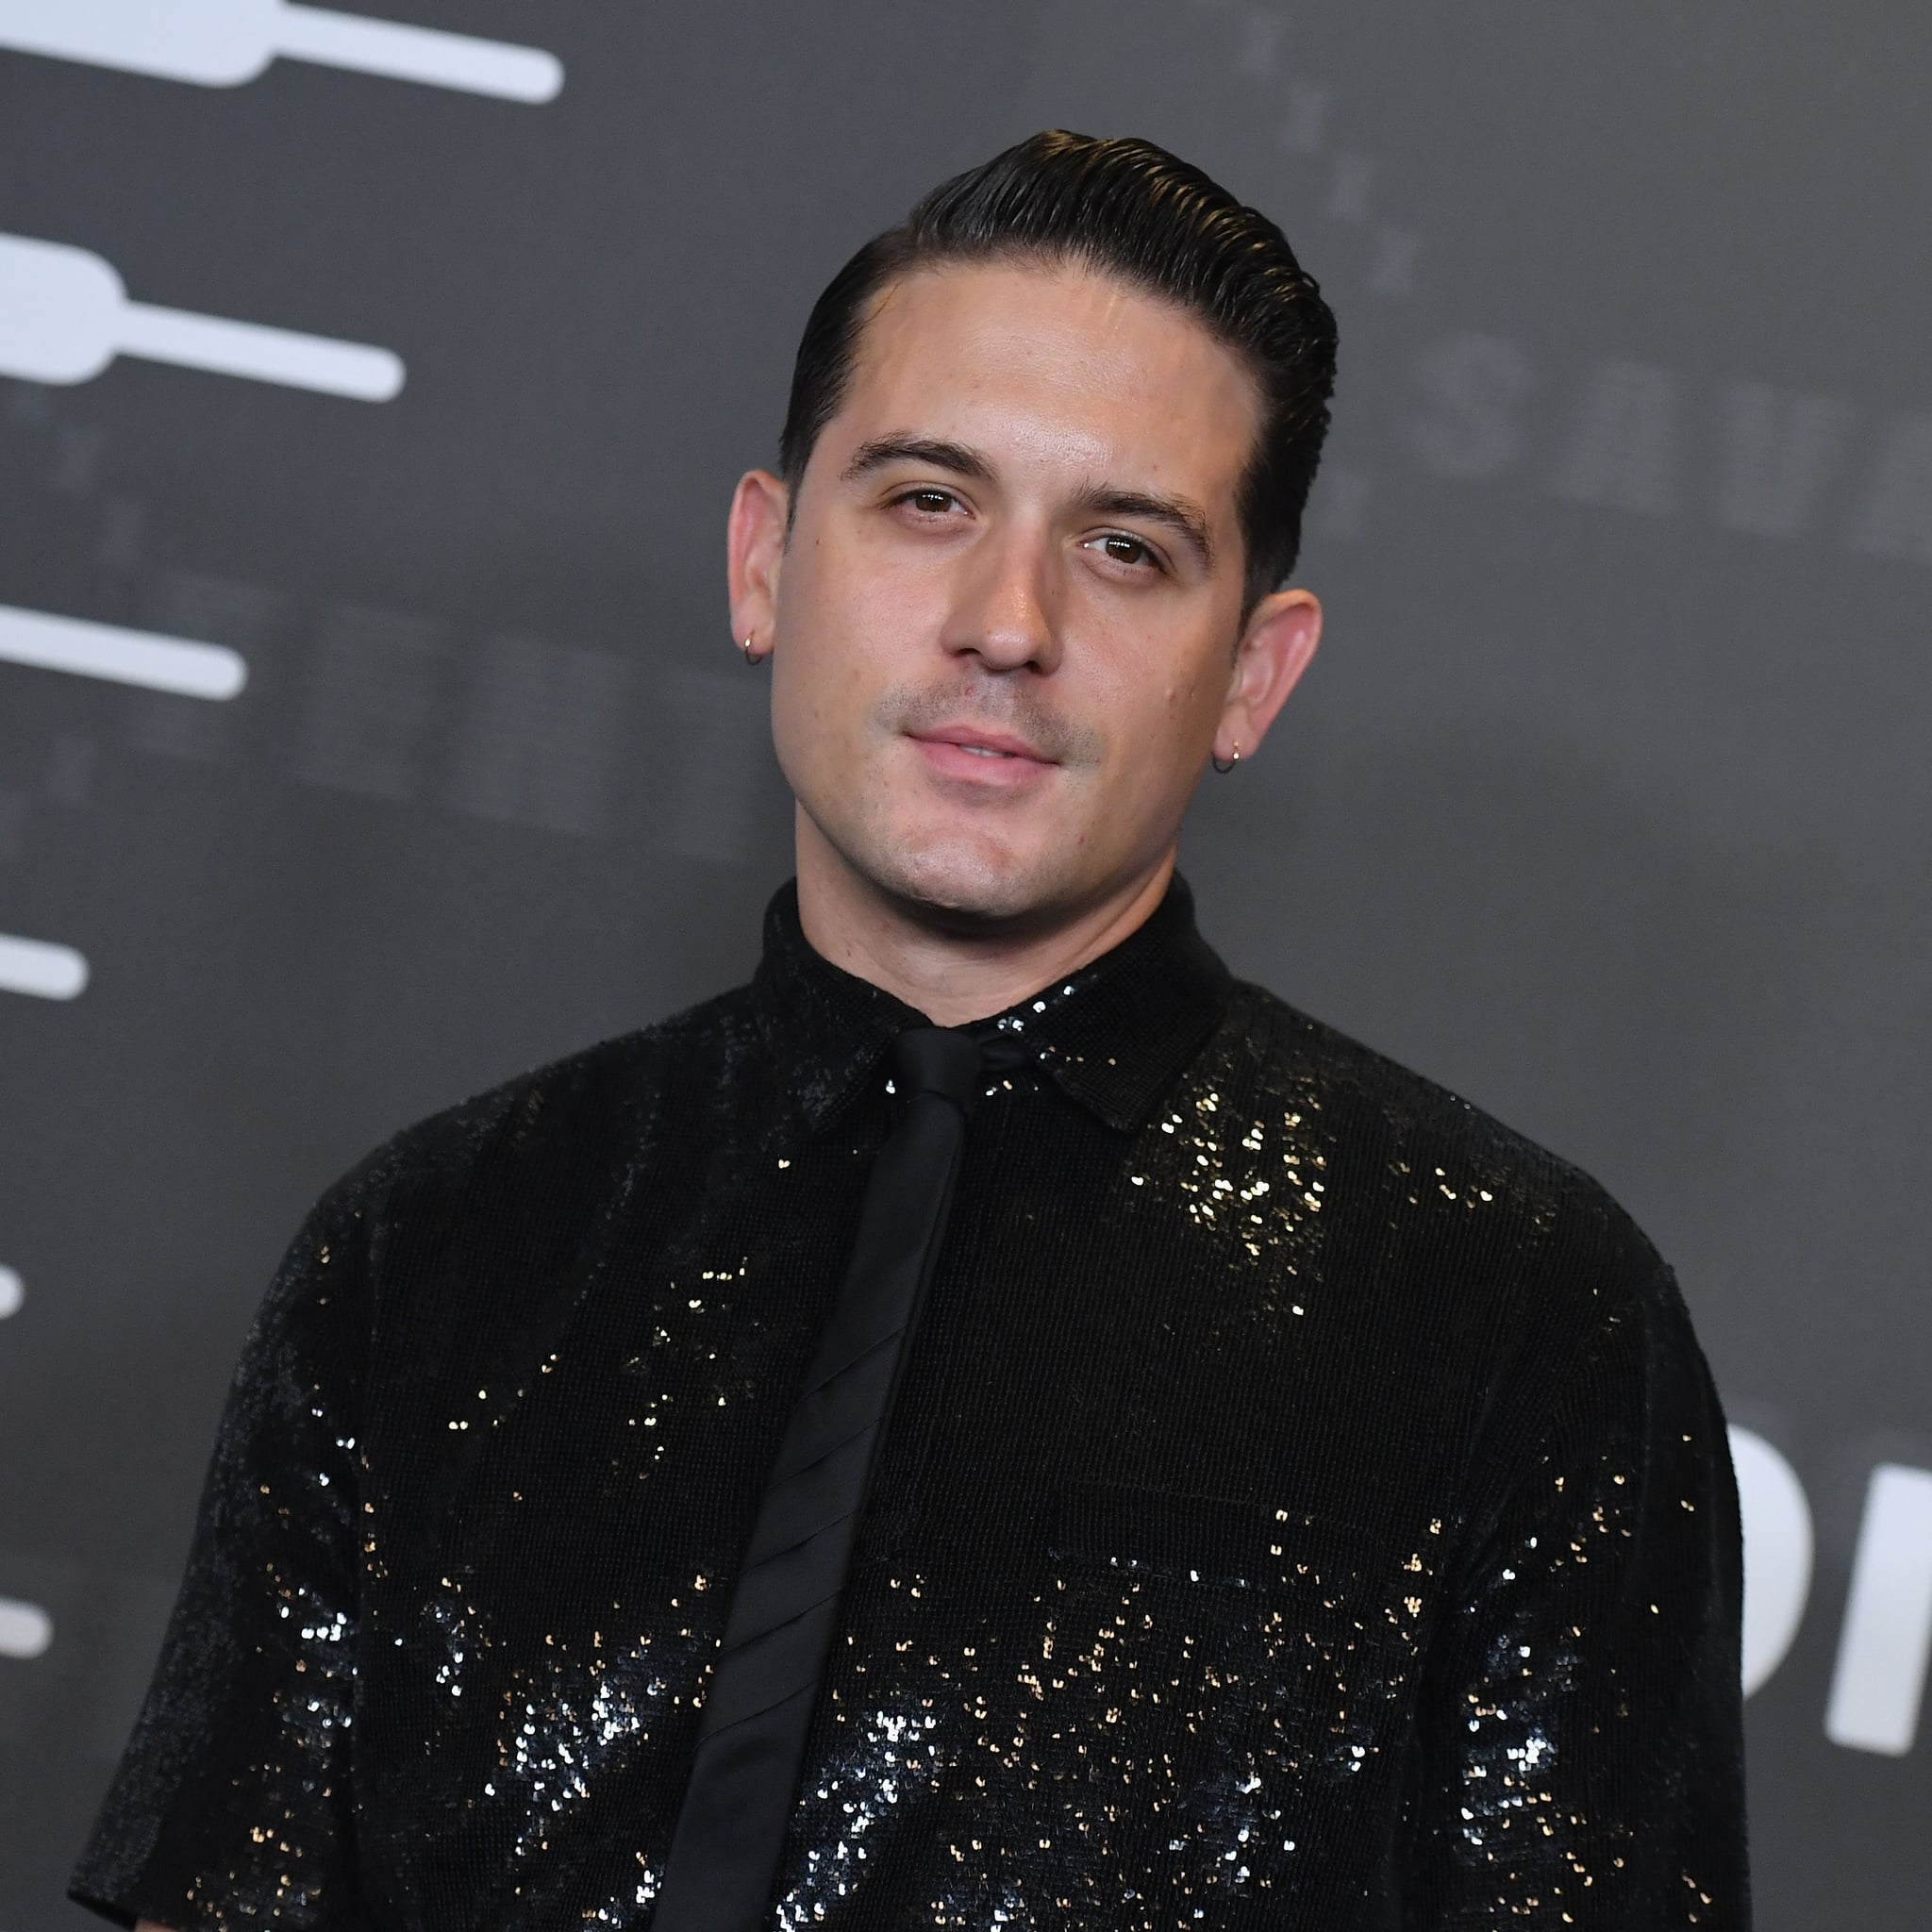 G-eazy dating